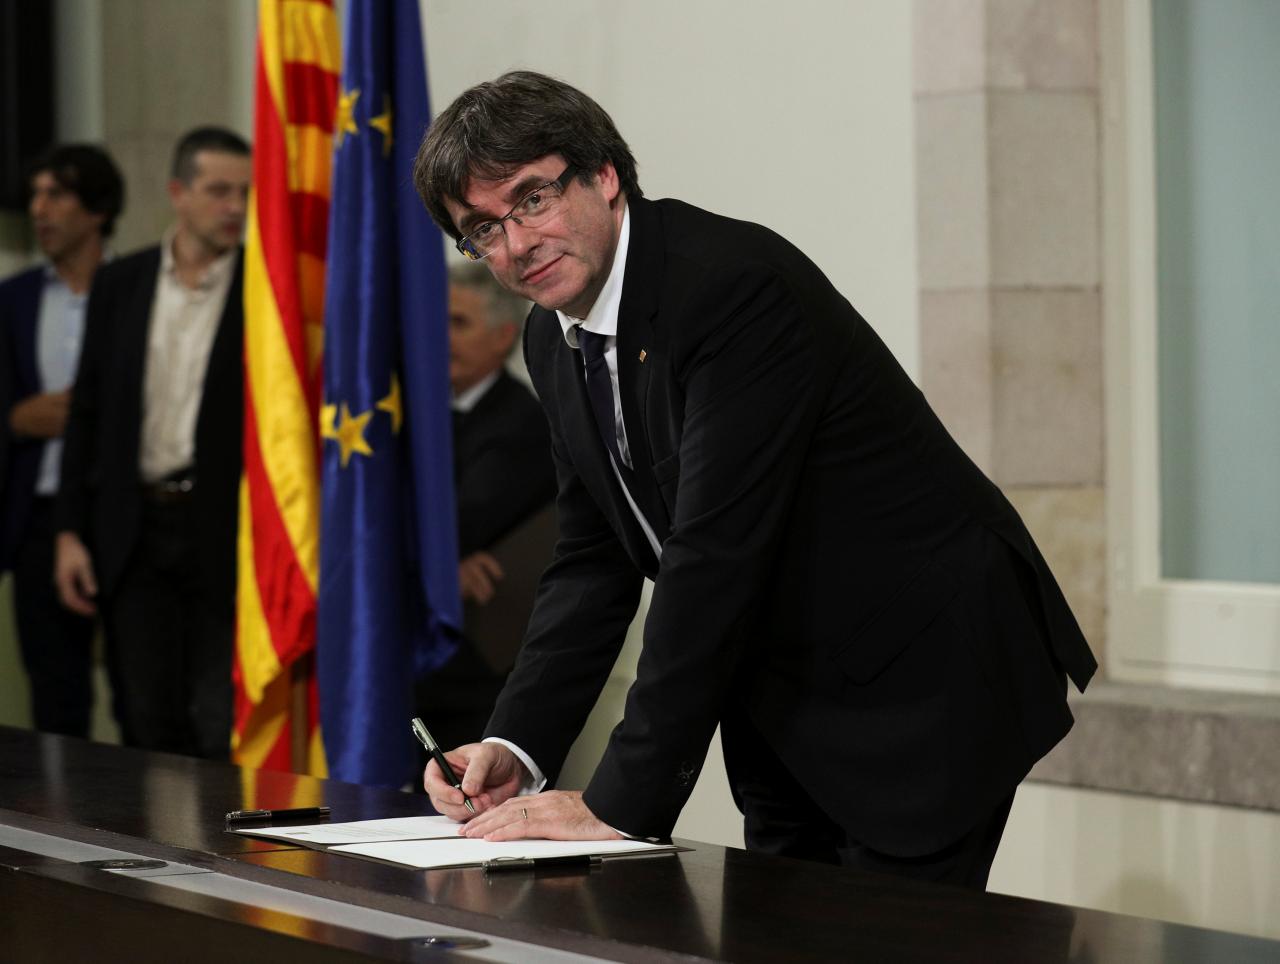 Catalan President Carles Puigdemont signs a declaration of independence at the Catalan regional parliament in Barcelona, Spain, October 10, 2017. REUTERS/Albert Gea